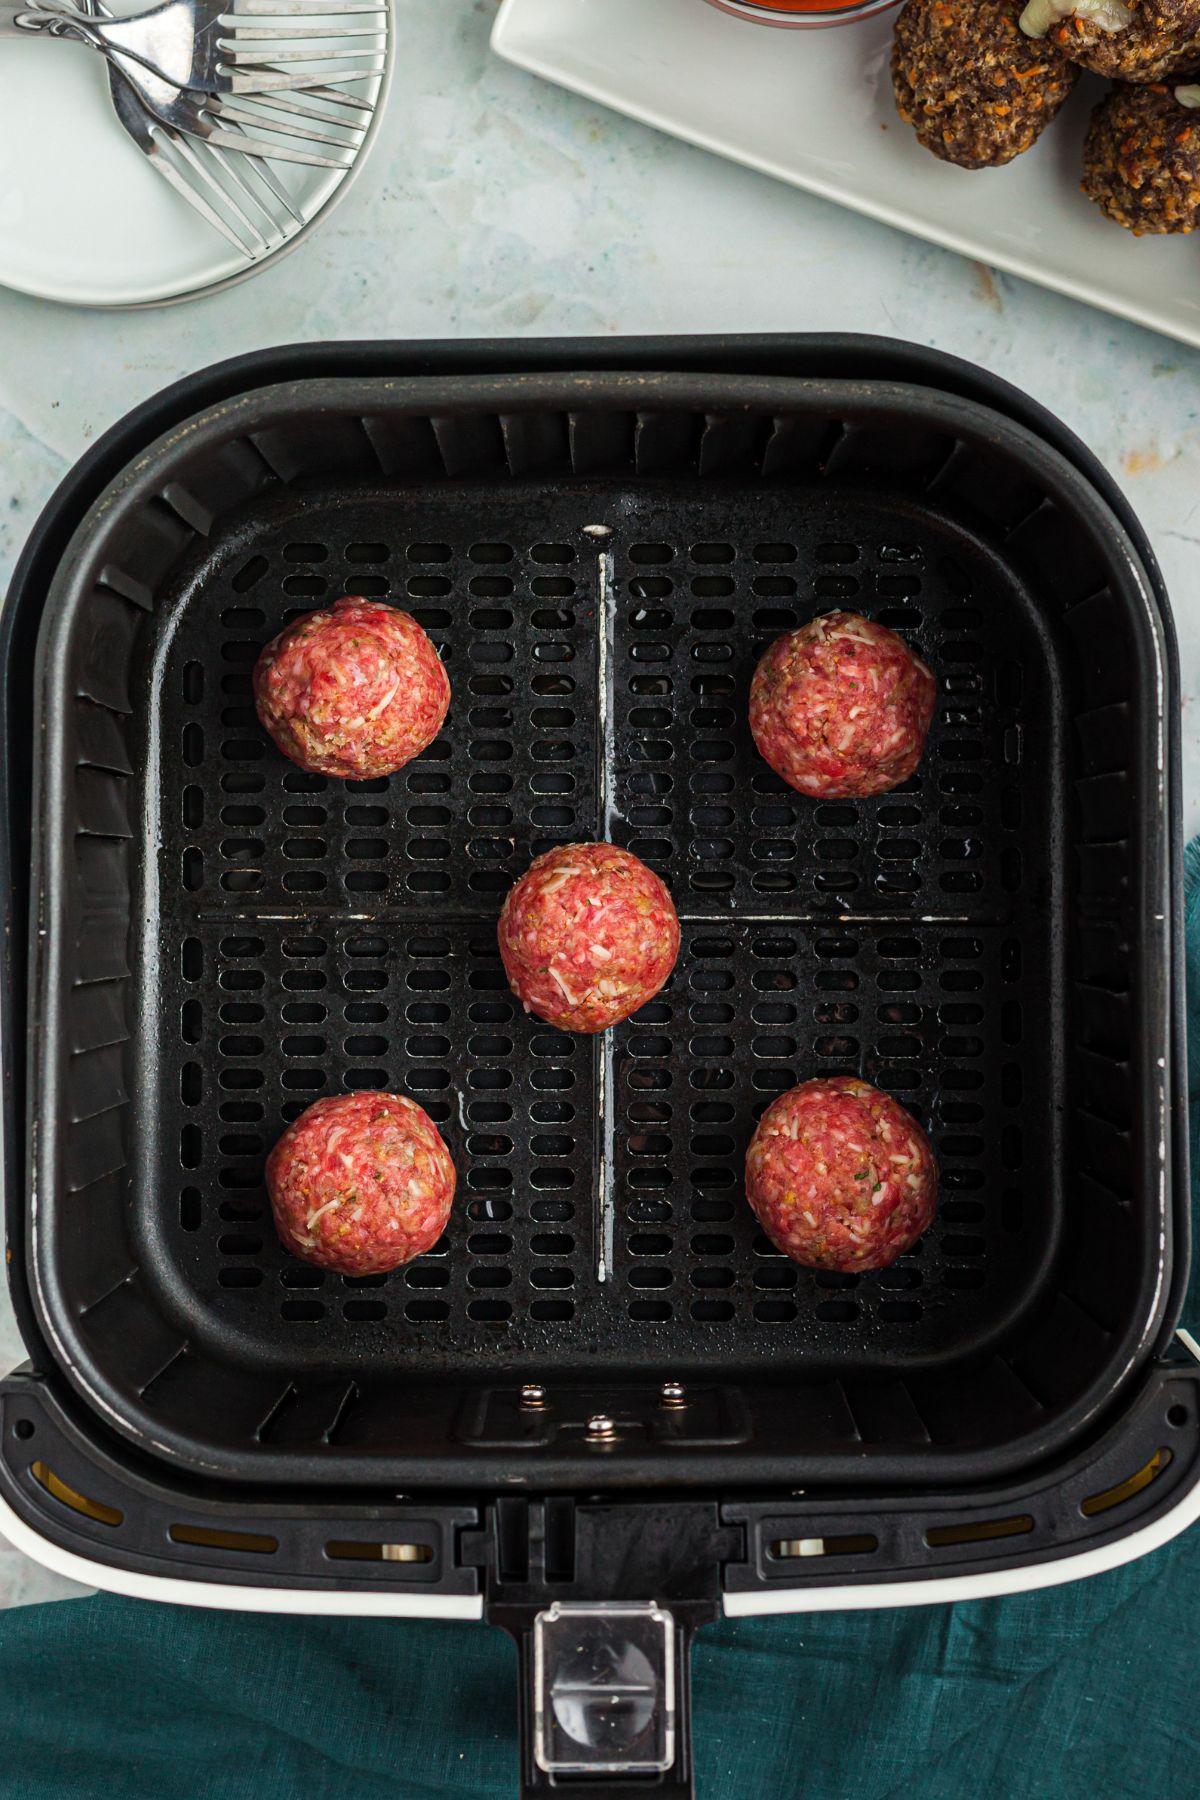 Uncooked meatballs rolled and placed in the air fryer basket.